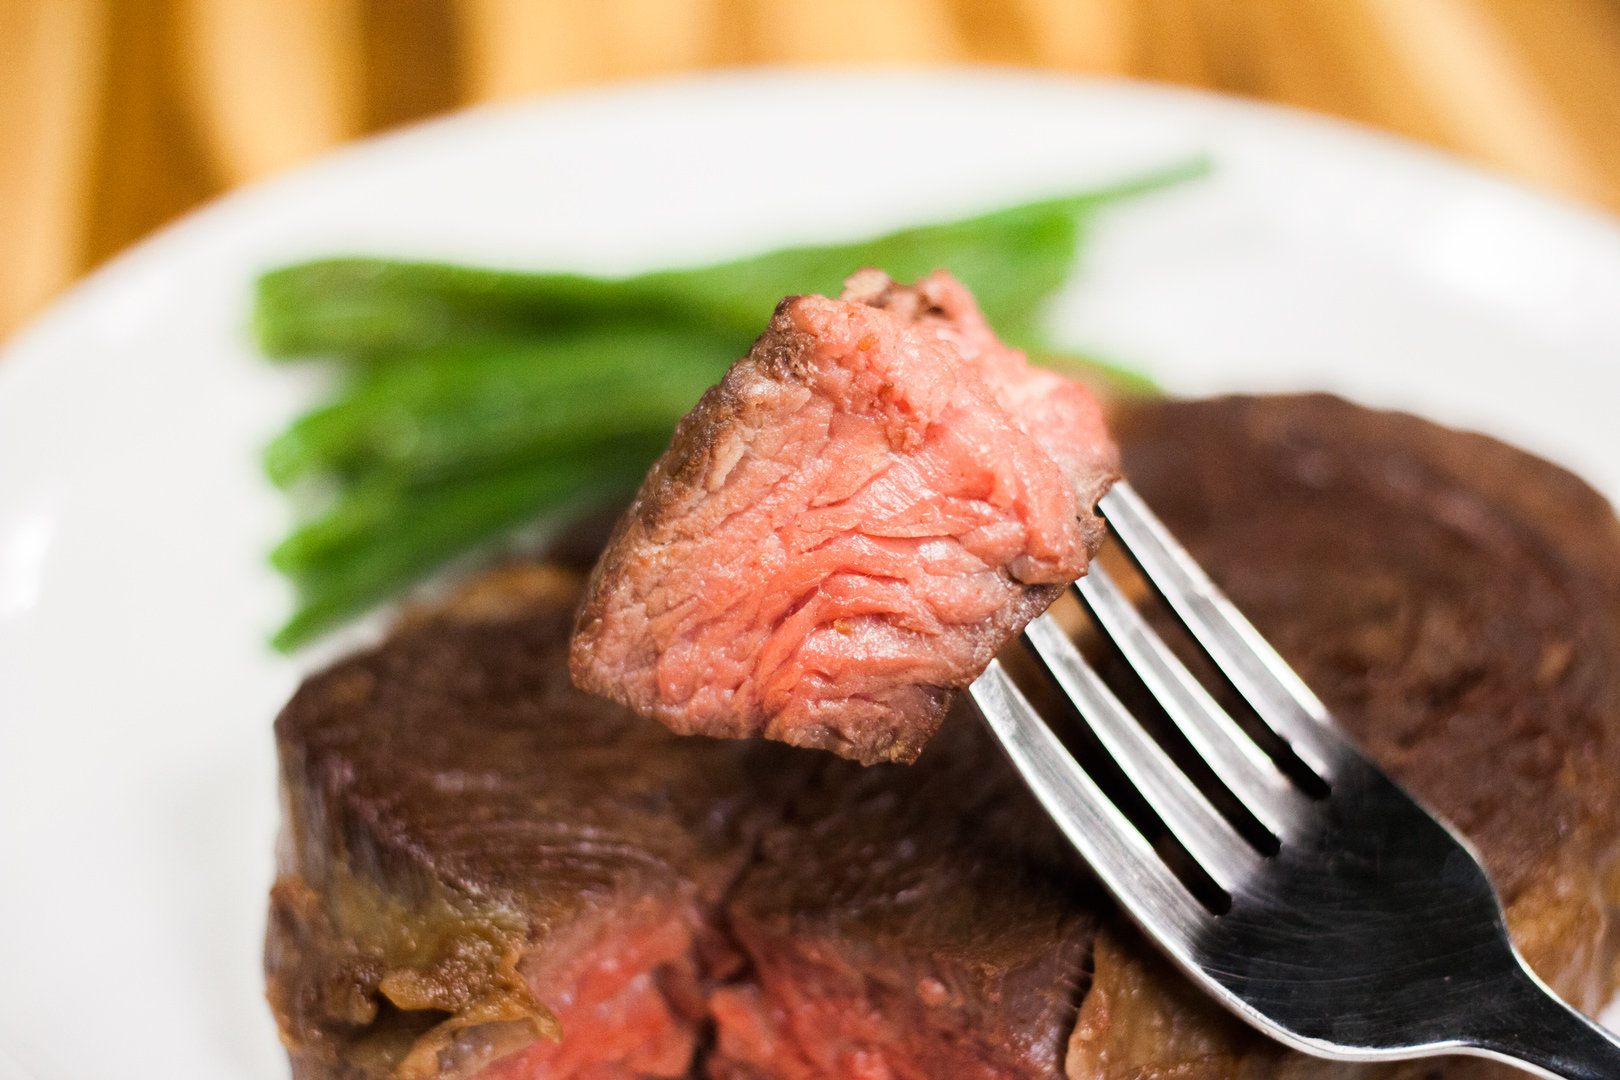 Why Eating Red Meat A Little Rare Is Not Only Okay It Tastes Better Muslim Eater,Cooking Ribs